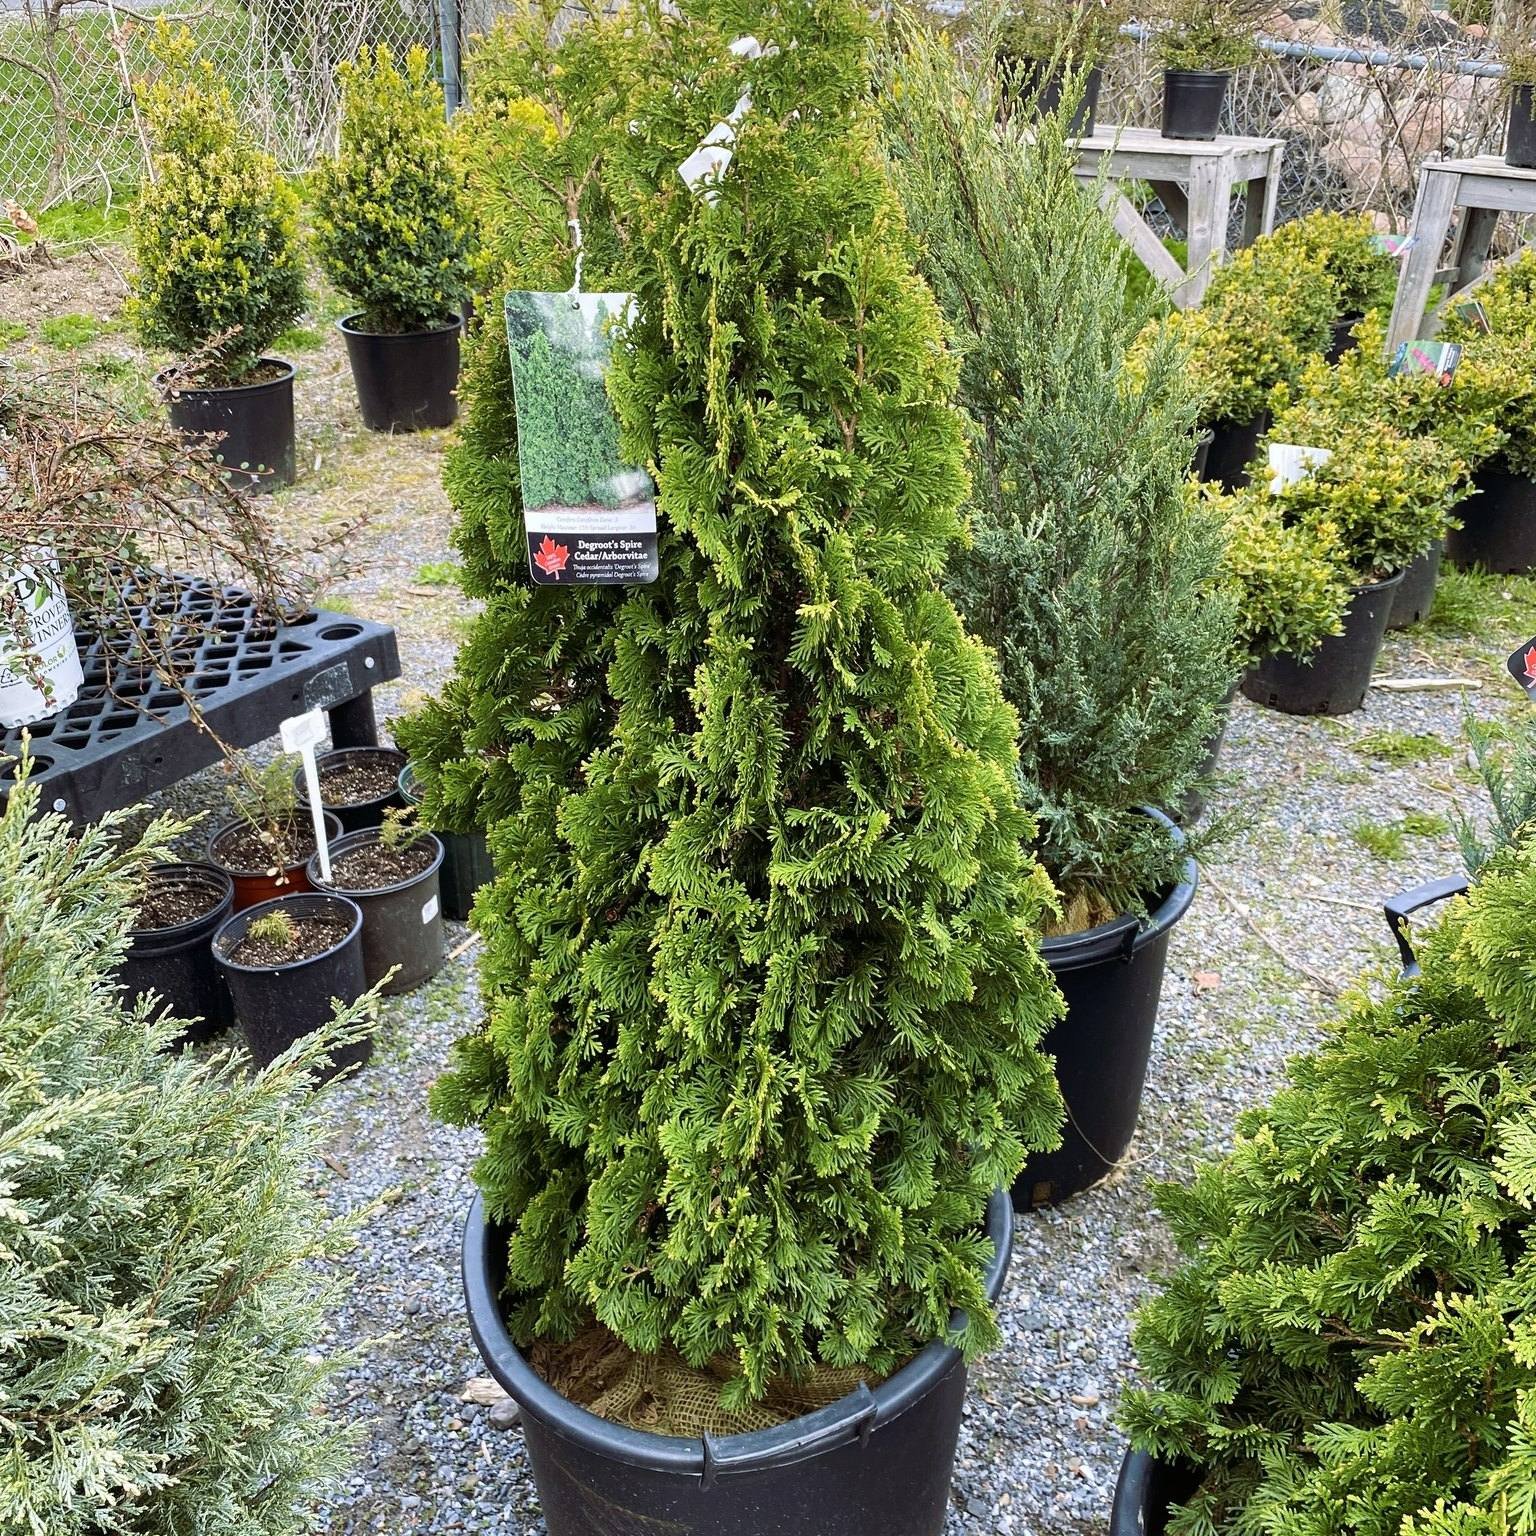 🌲 Elevate Your Landscape with Majestic Cedars! 🌿 From ground cover to towering trees, we've got your greenery needs covered:

Ground Cover Cedars: Starting at $42.99
Perfect for adding texture and depth to your garden beds, these low-growing cedars